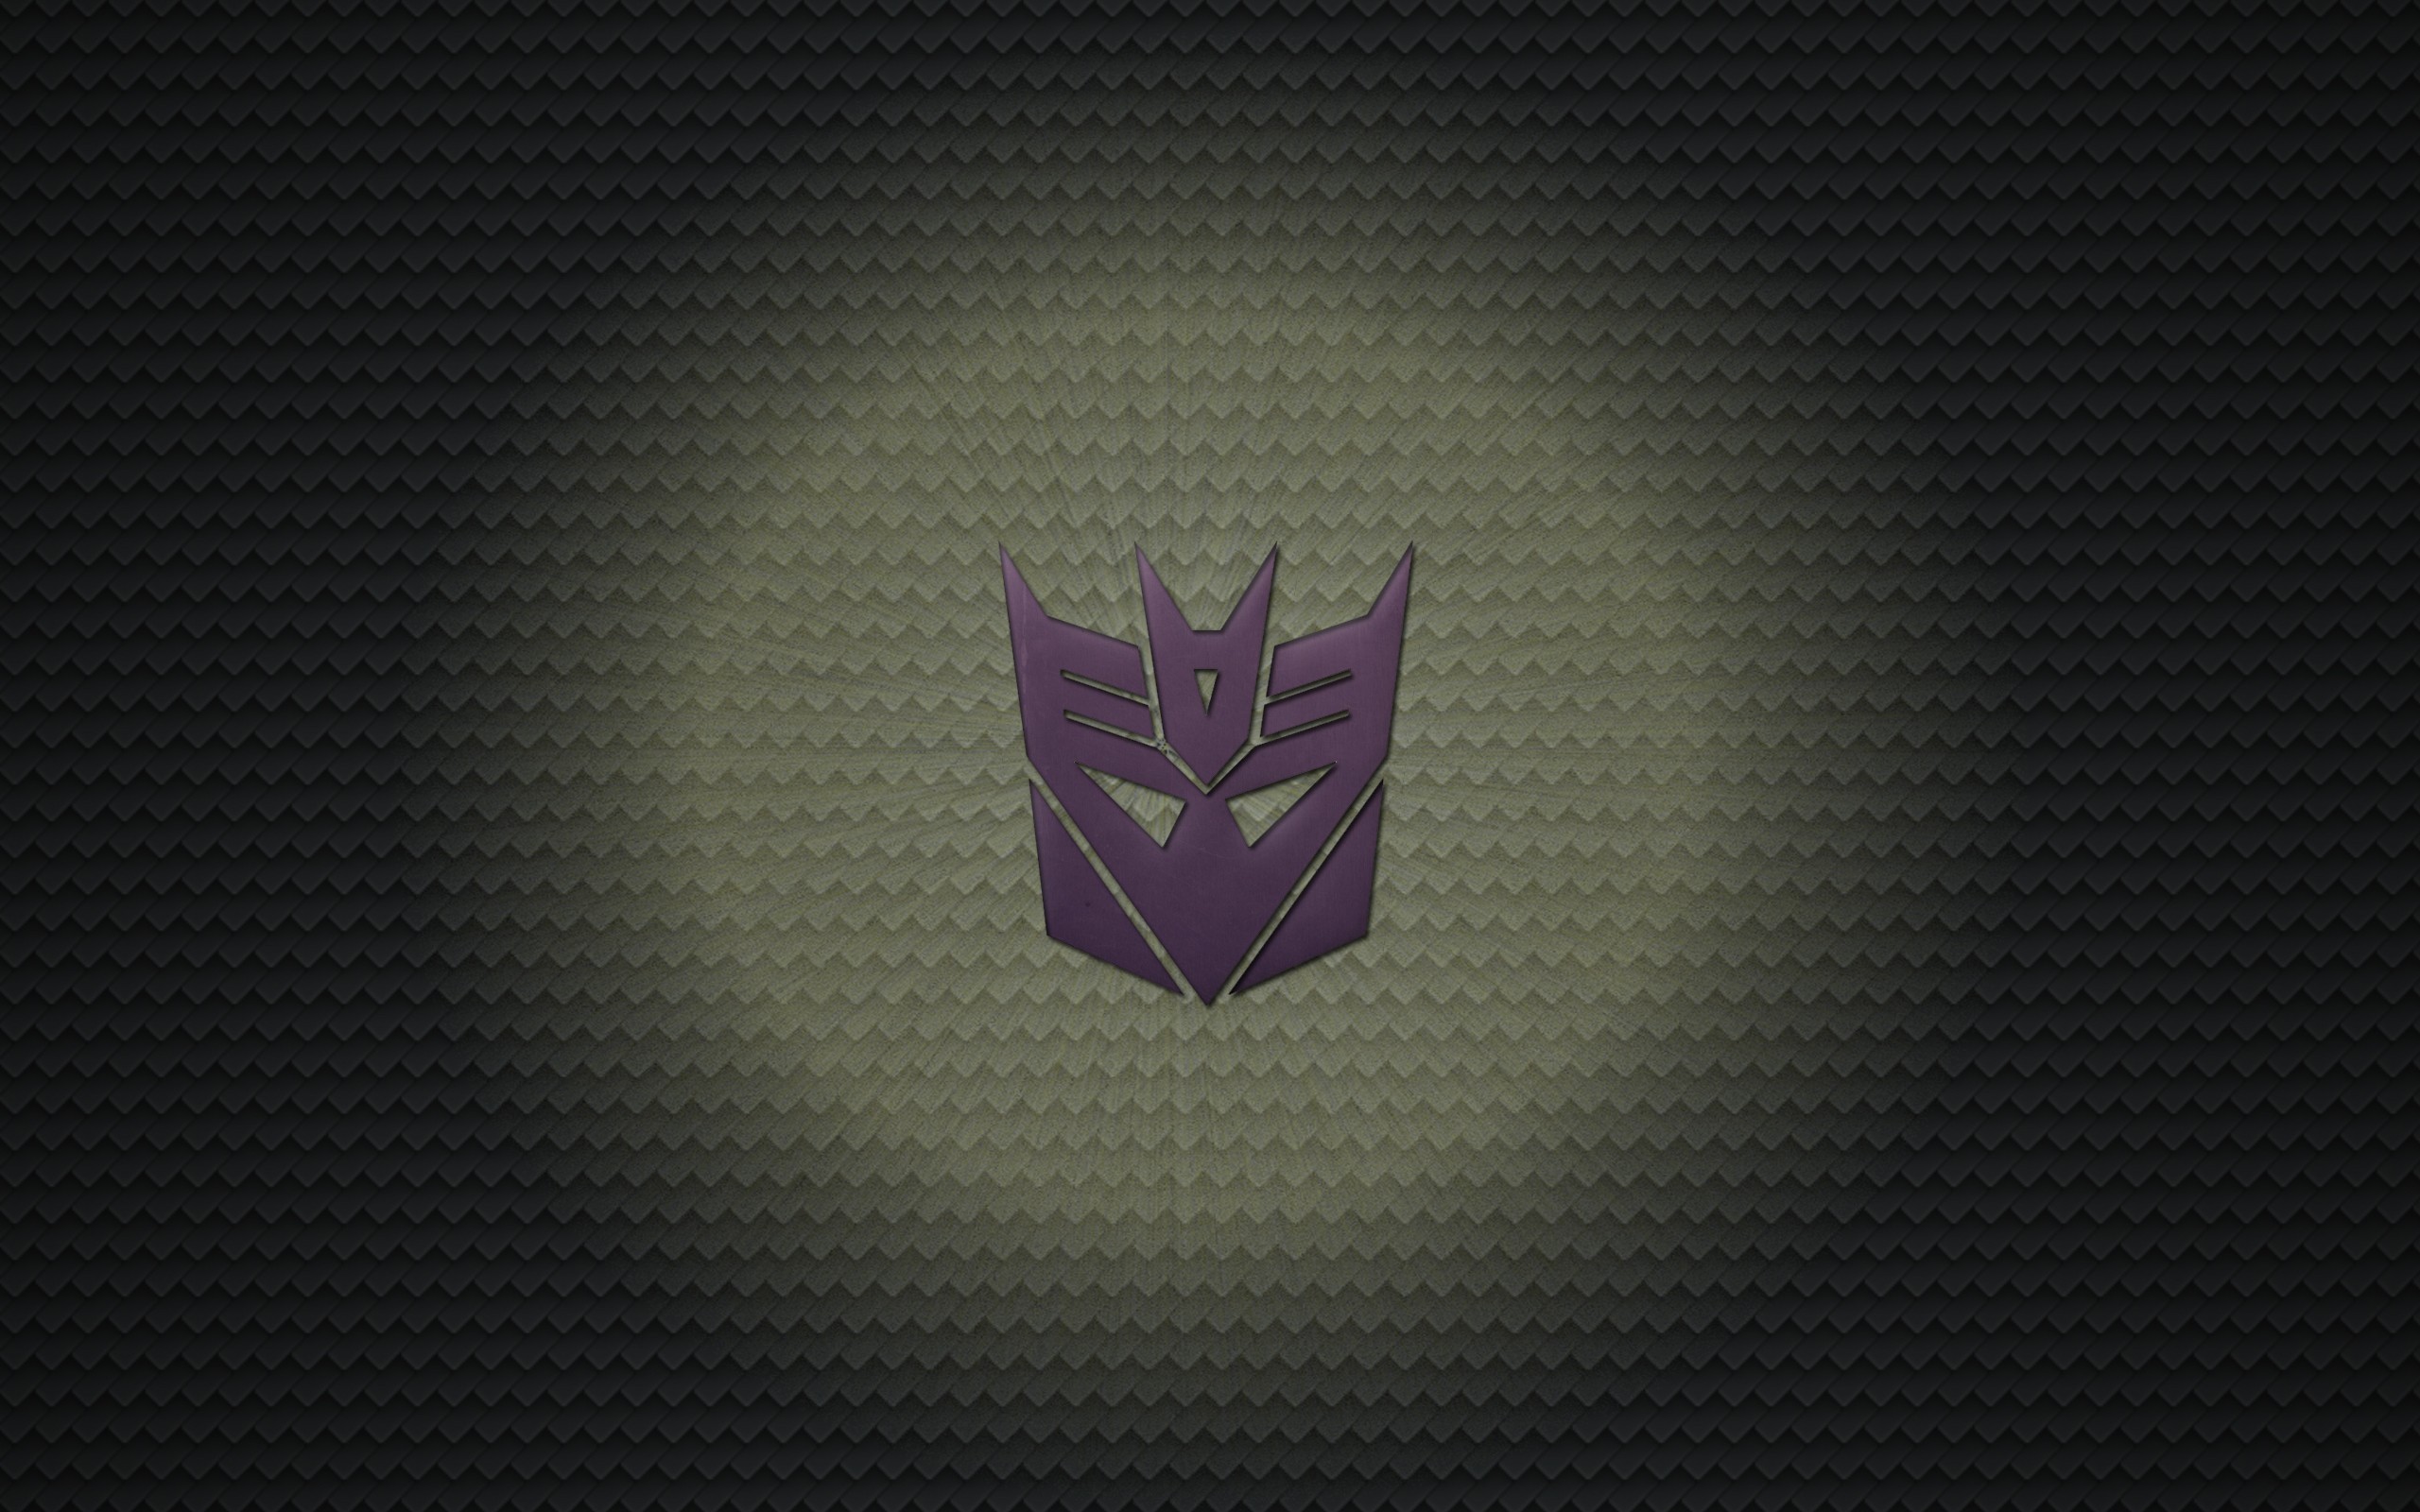 Wallpaper.wiki Image of Decepticons PIC WPB008297